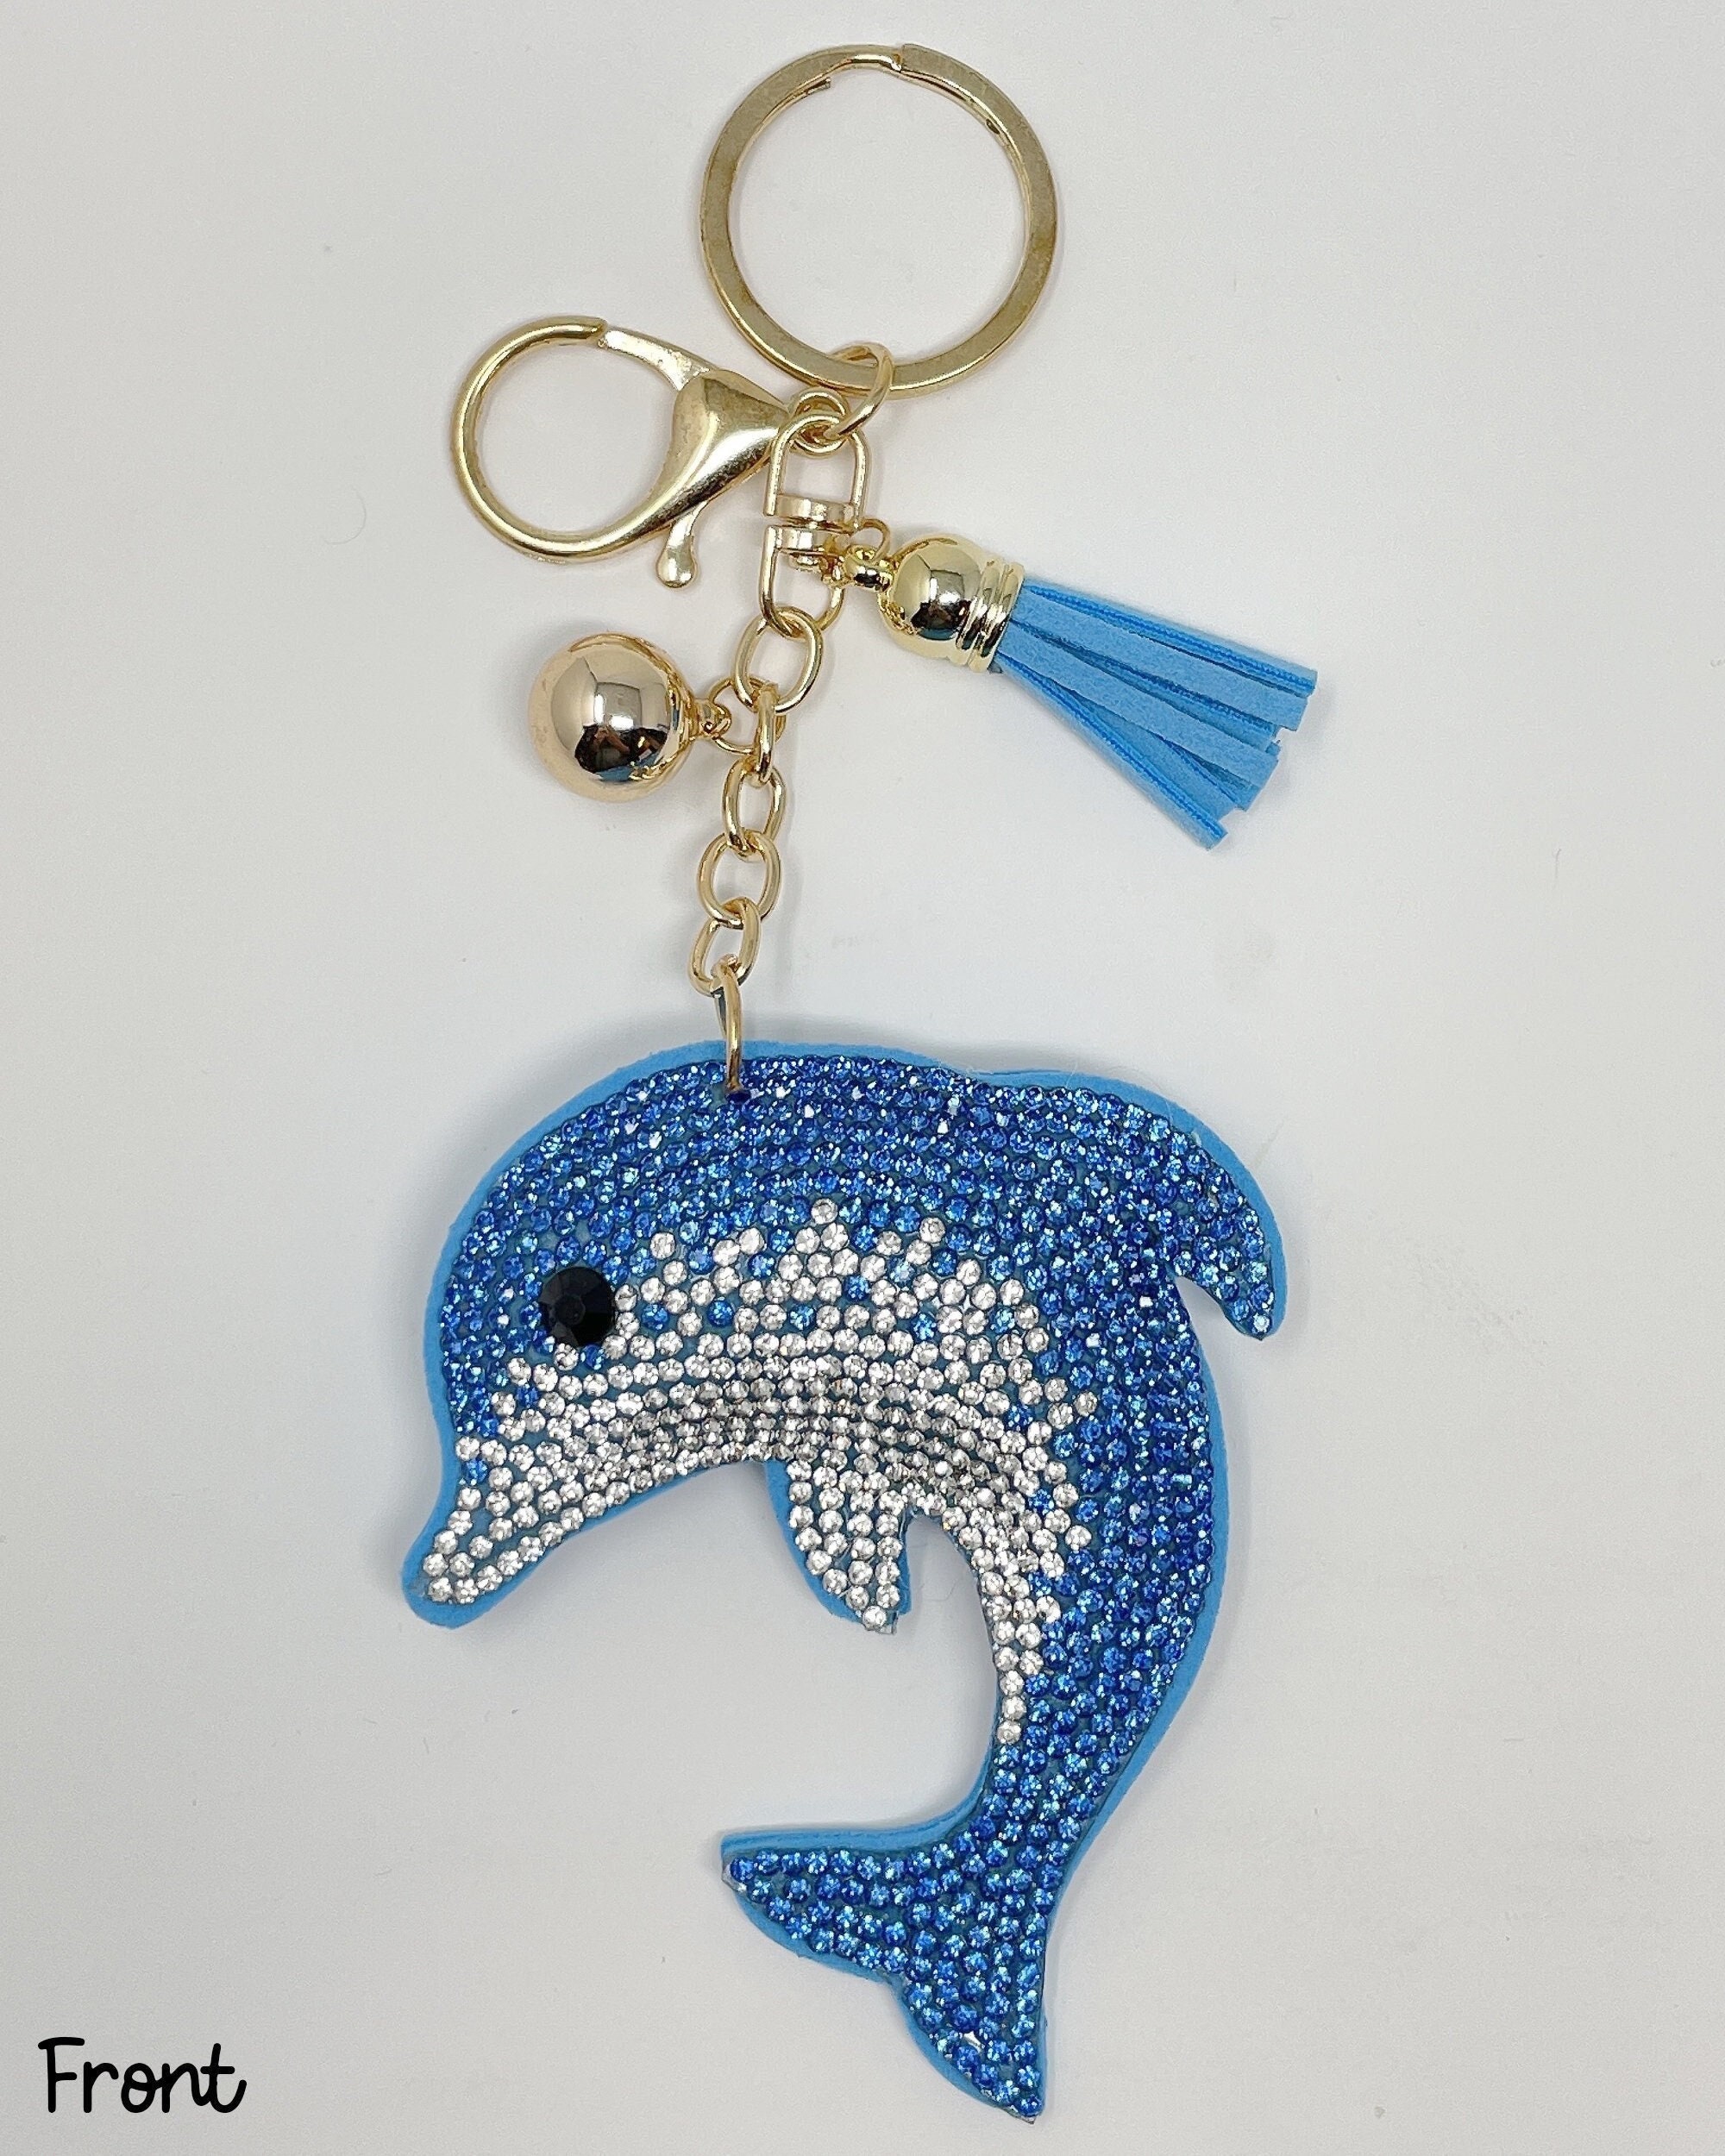 Glitter Sequin Dolphin Keychains for Kids Party Favors, Cute Bling Shark  Key Ring for Women Girls Purse Backpack Pendant (4 Pack)